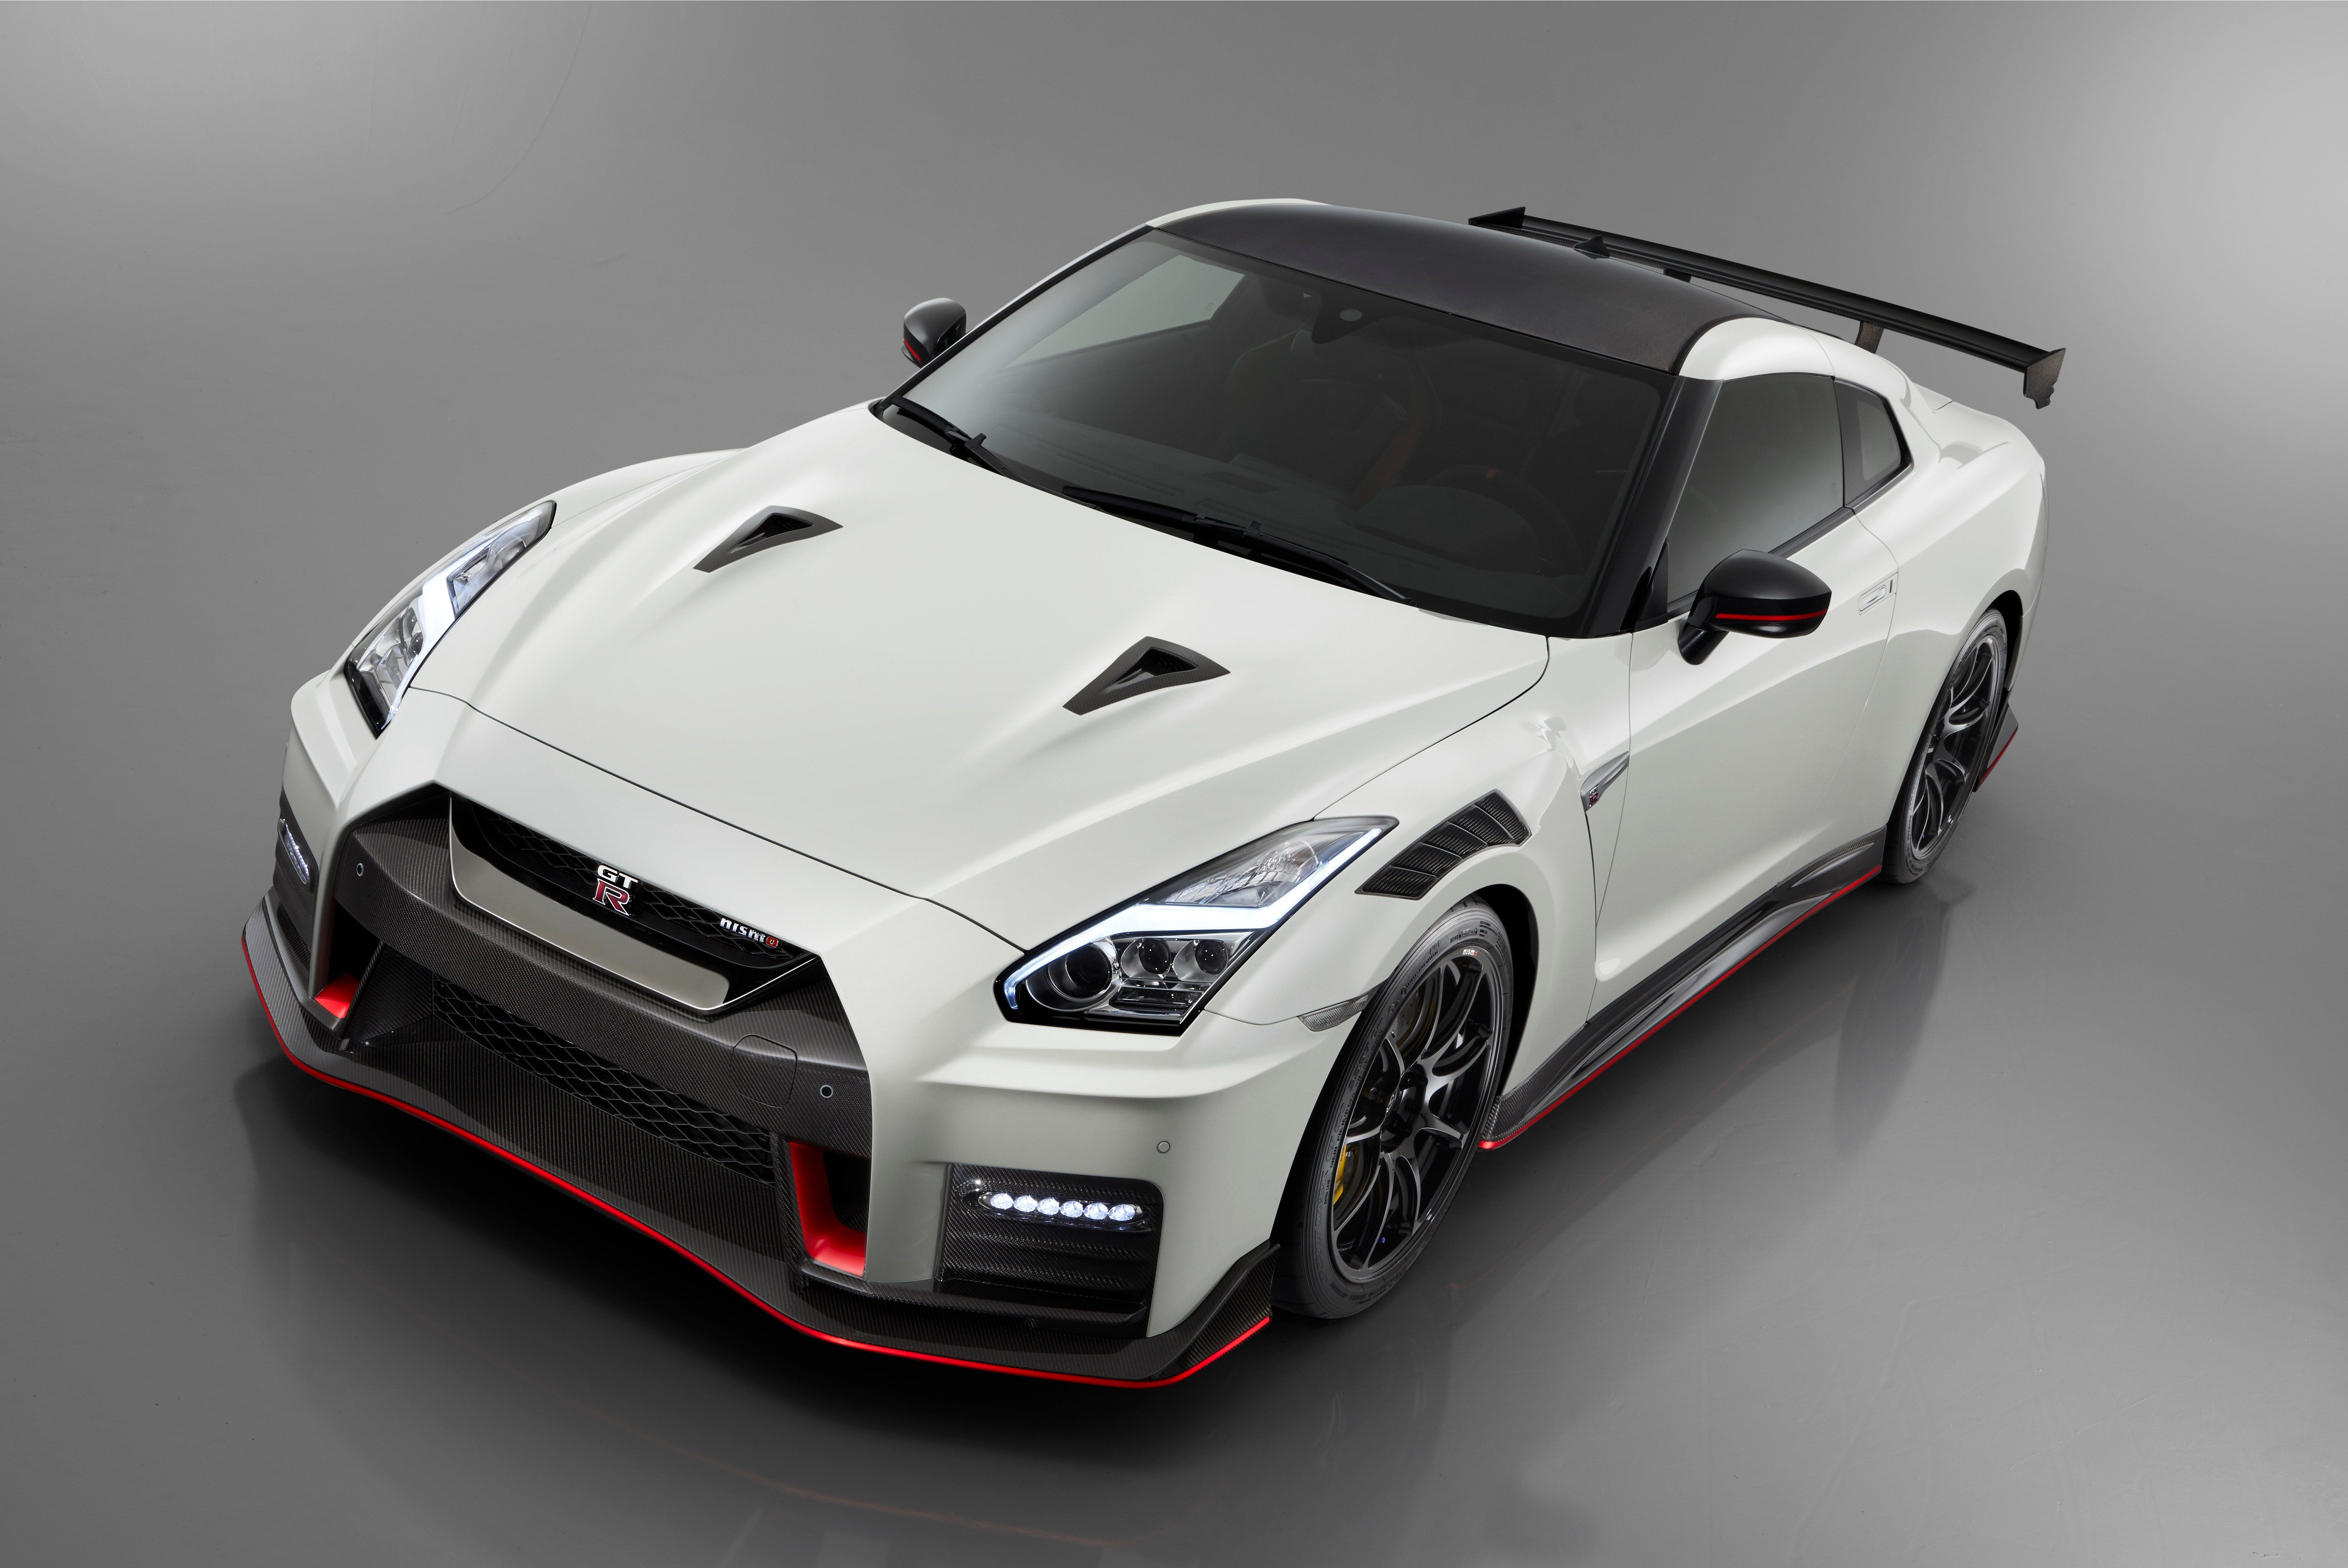 2019 Sorry Folks - The 2020 Nissan GT-R Nismo Is Here and It's Pretty Much the Same